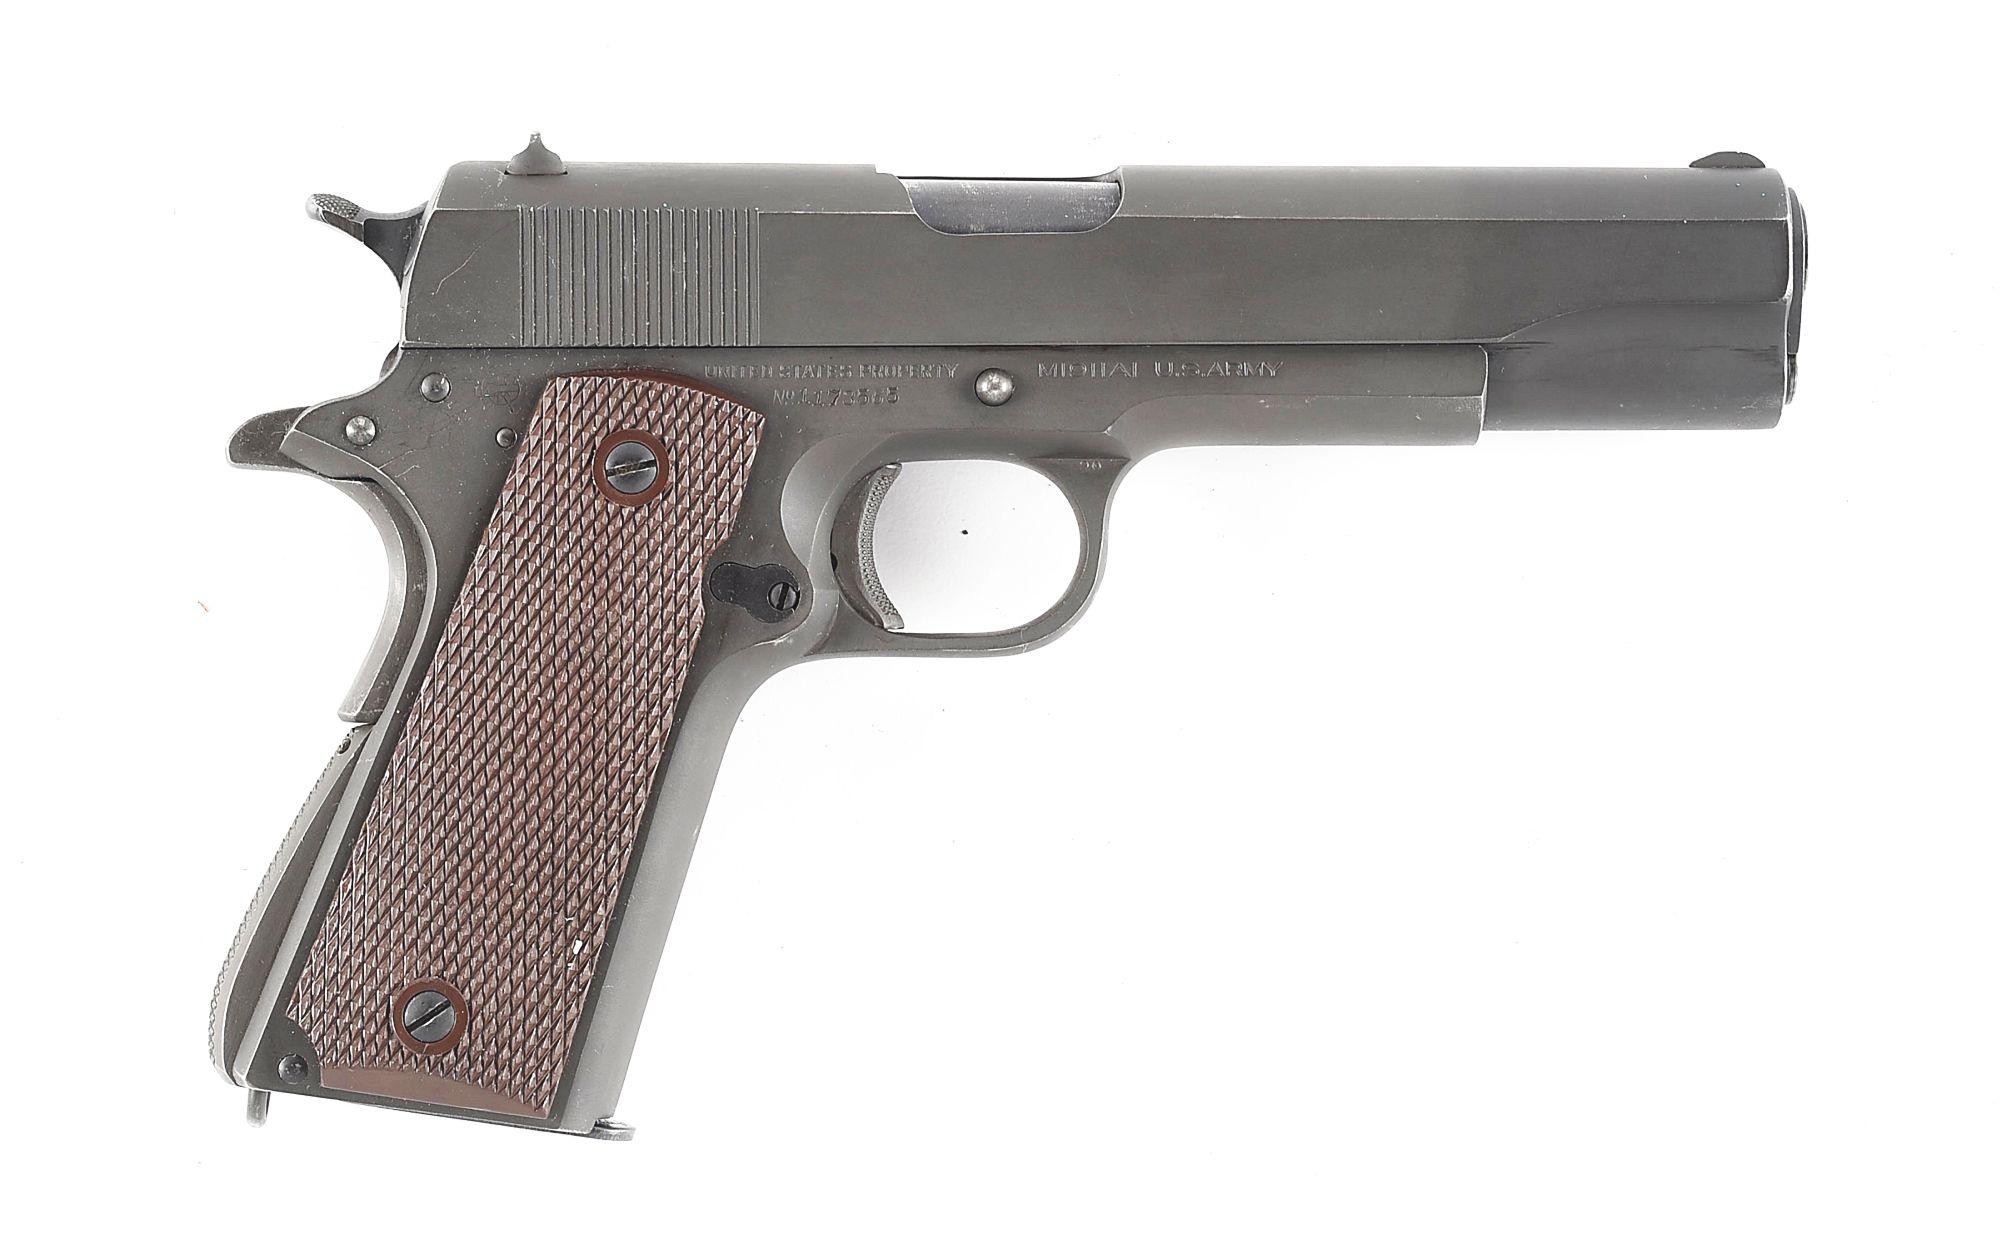 (C) COLT M1911A1 SEMI-AUTOMATIC PISTOL WITH HOLSTER (1943).